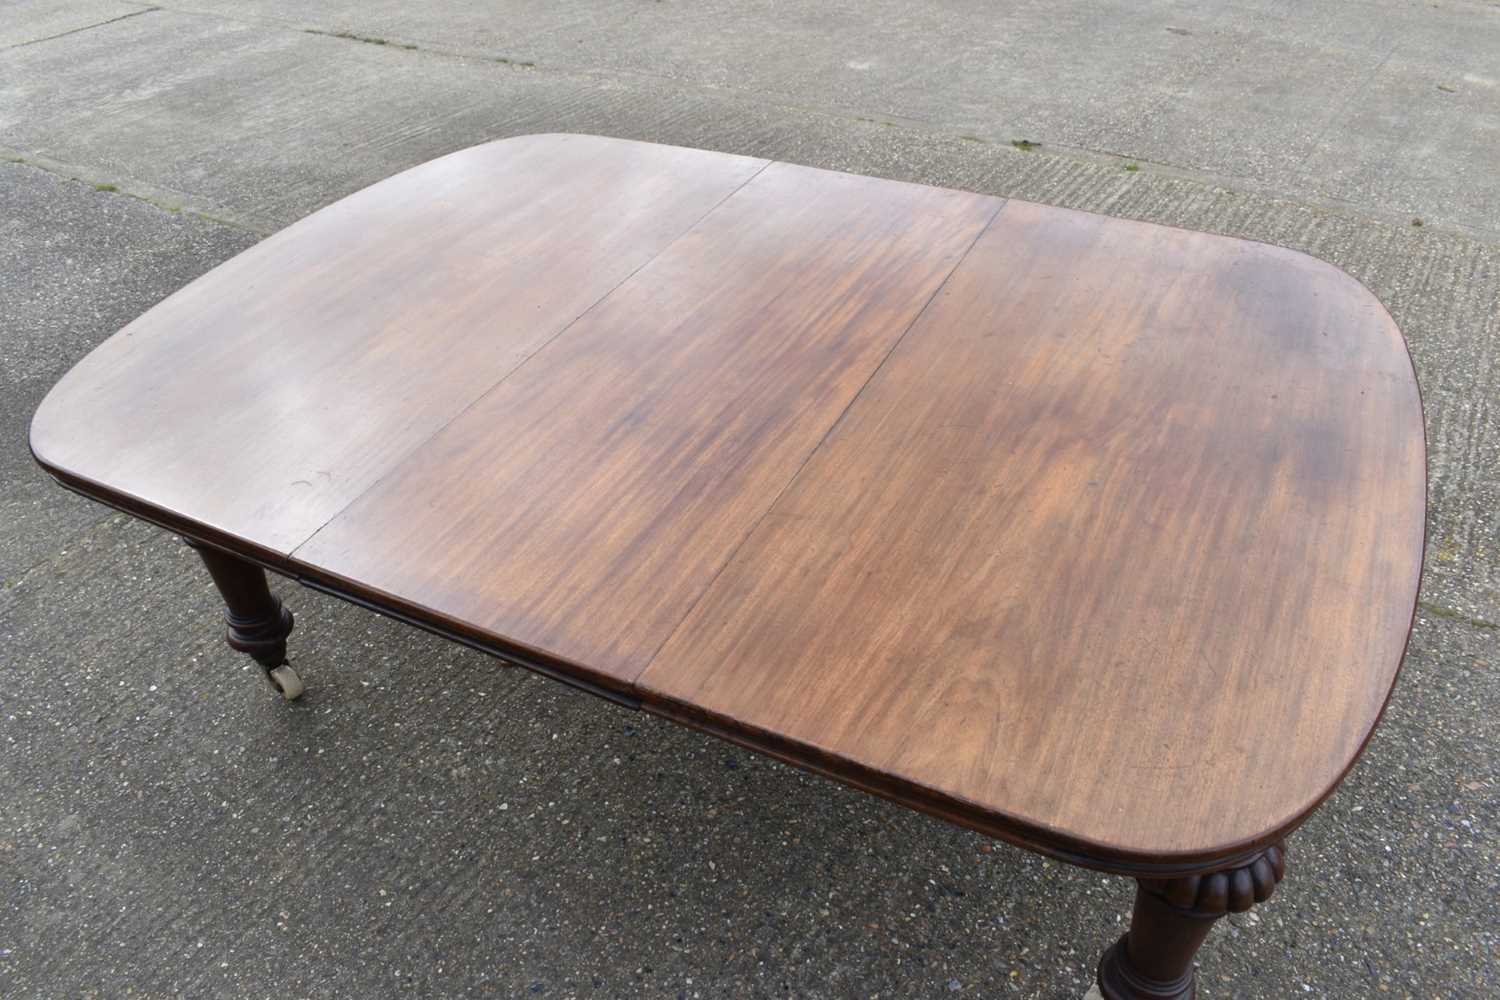 Victorian Irish mahogany extending dining table with one additional leaf by Strahan & Co - Image 2 of 8